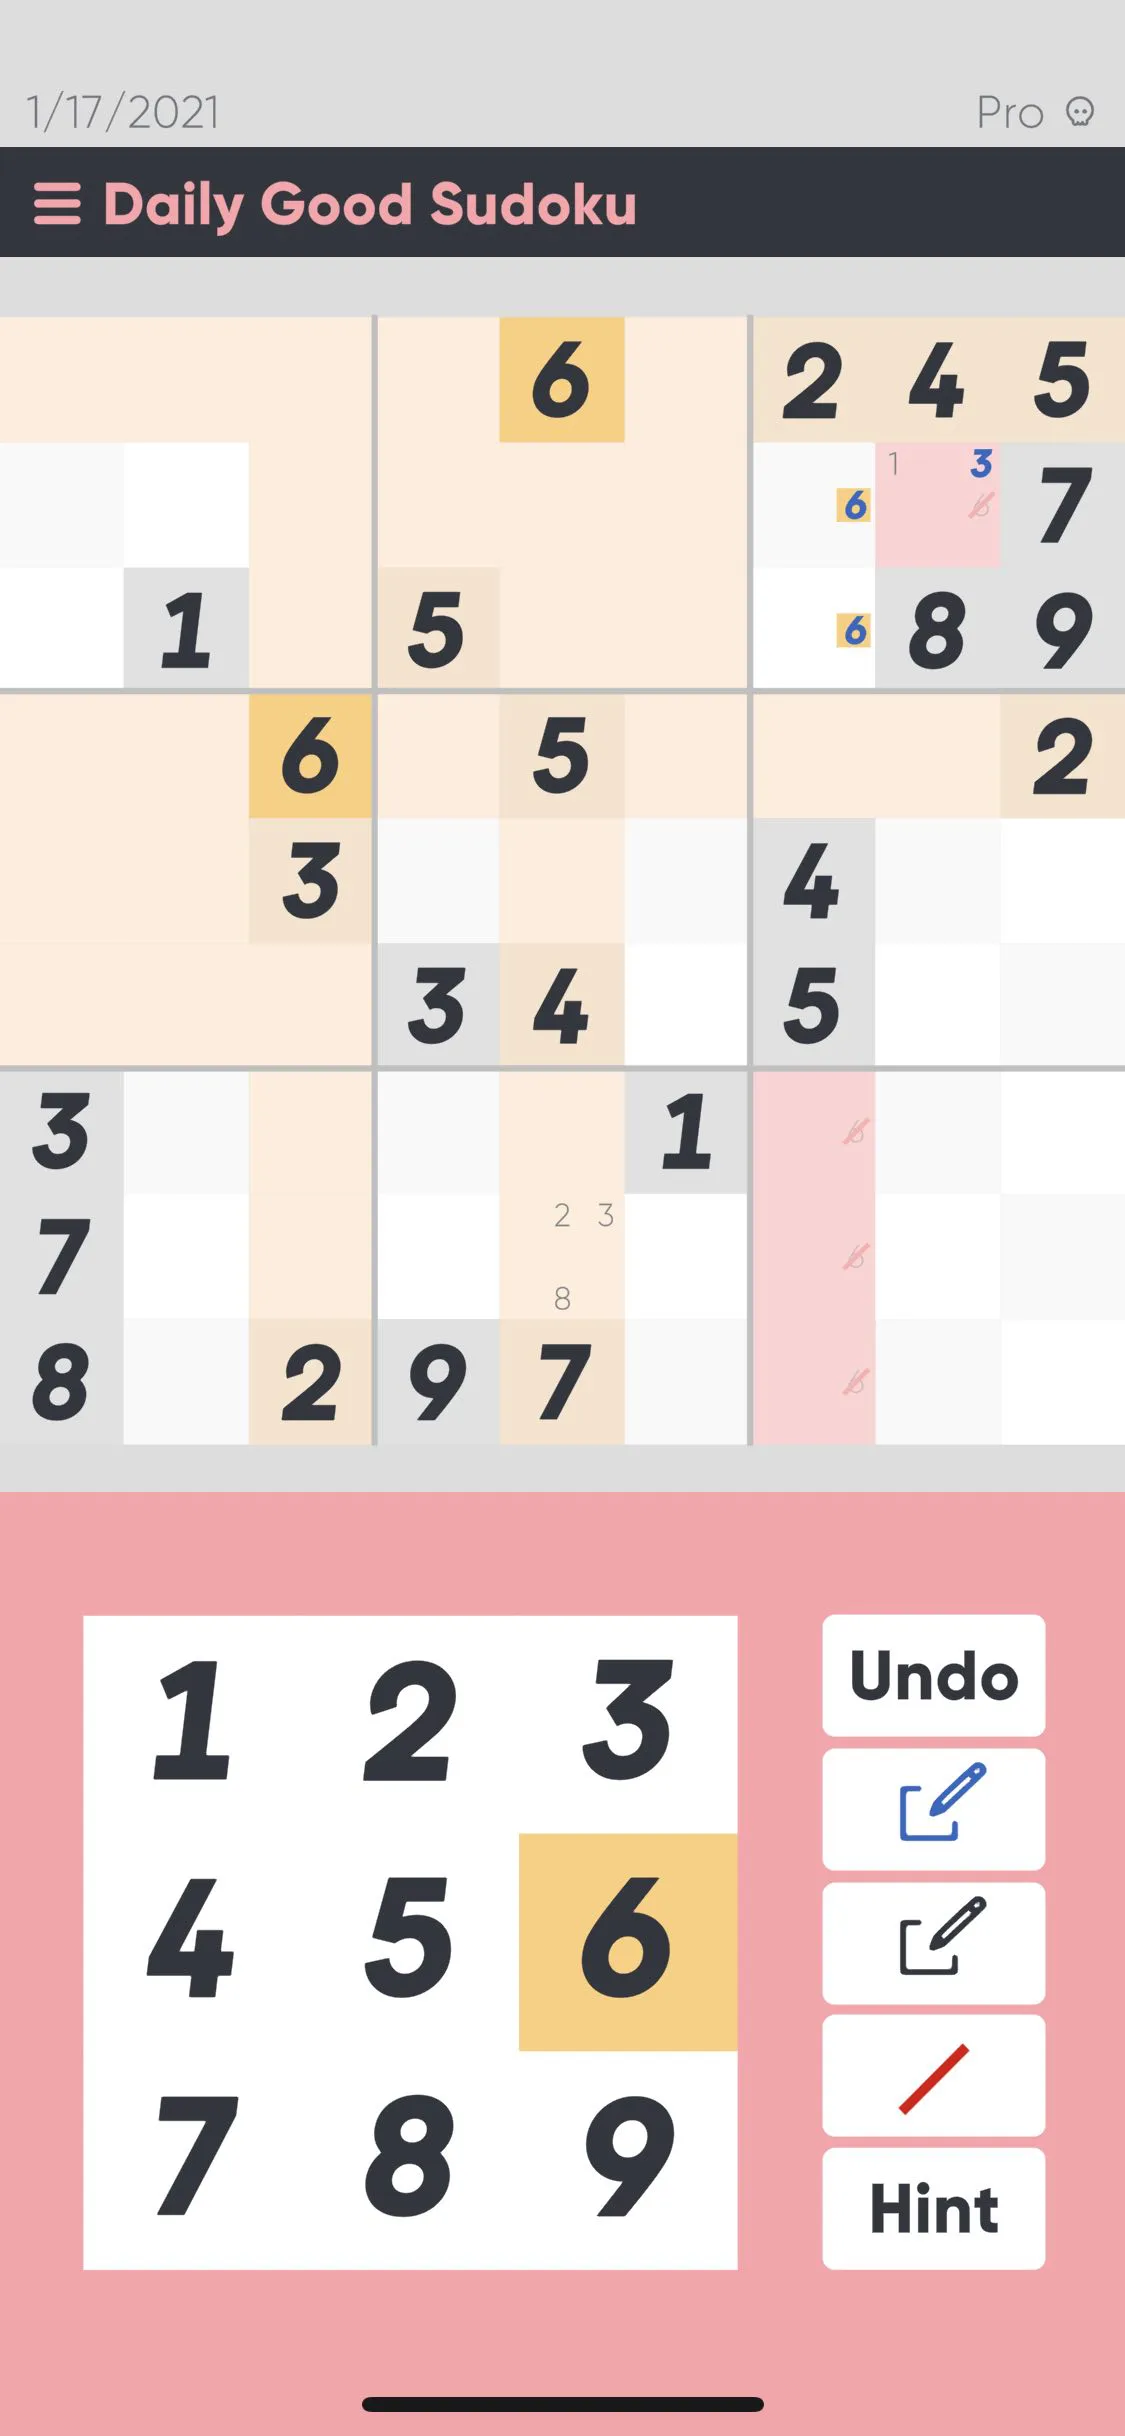 A screenhsot of good sudoku with 6 highlighted.